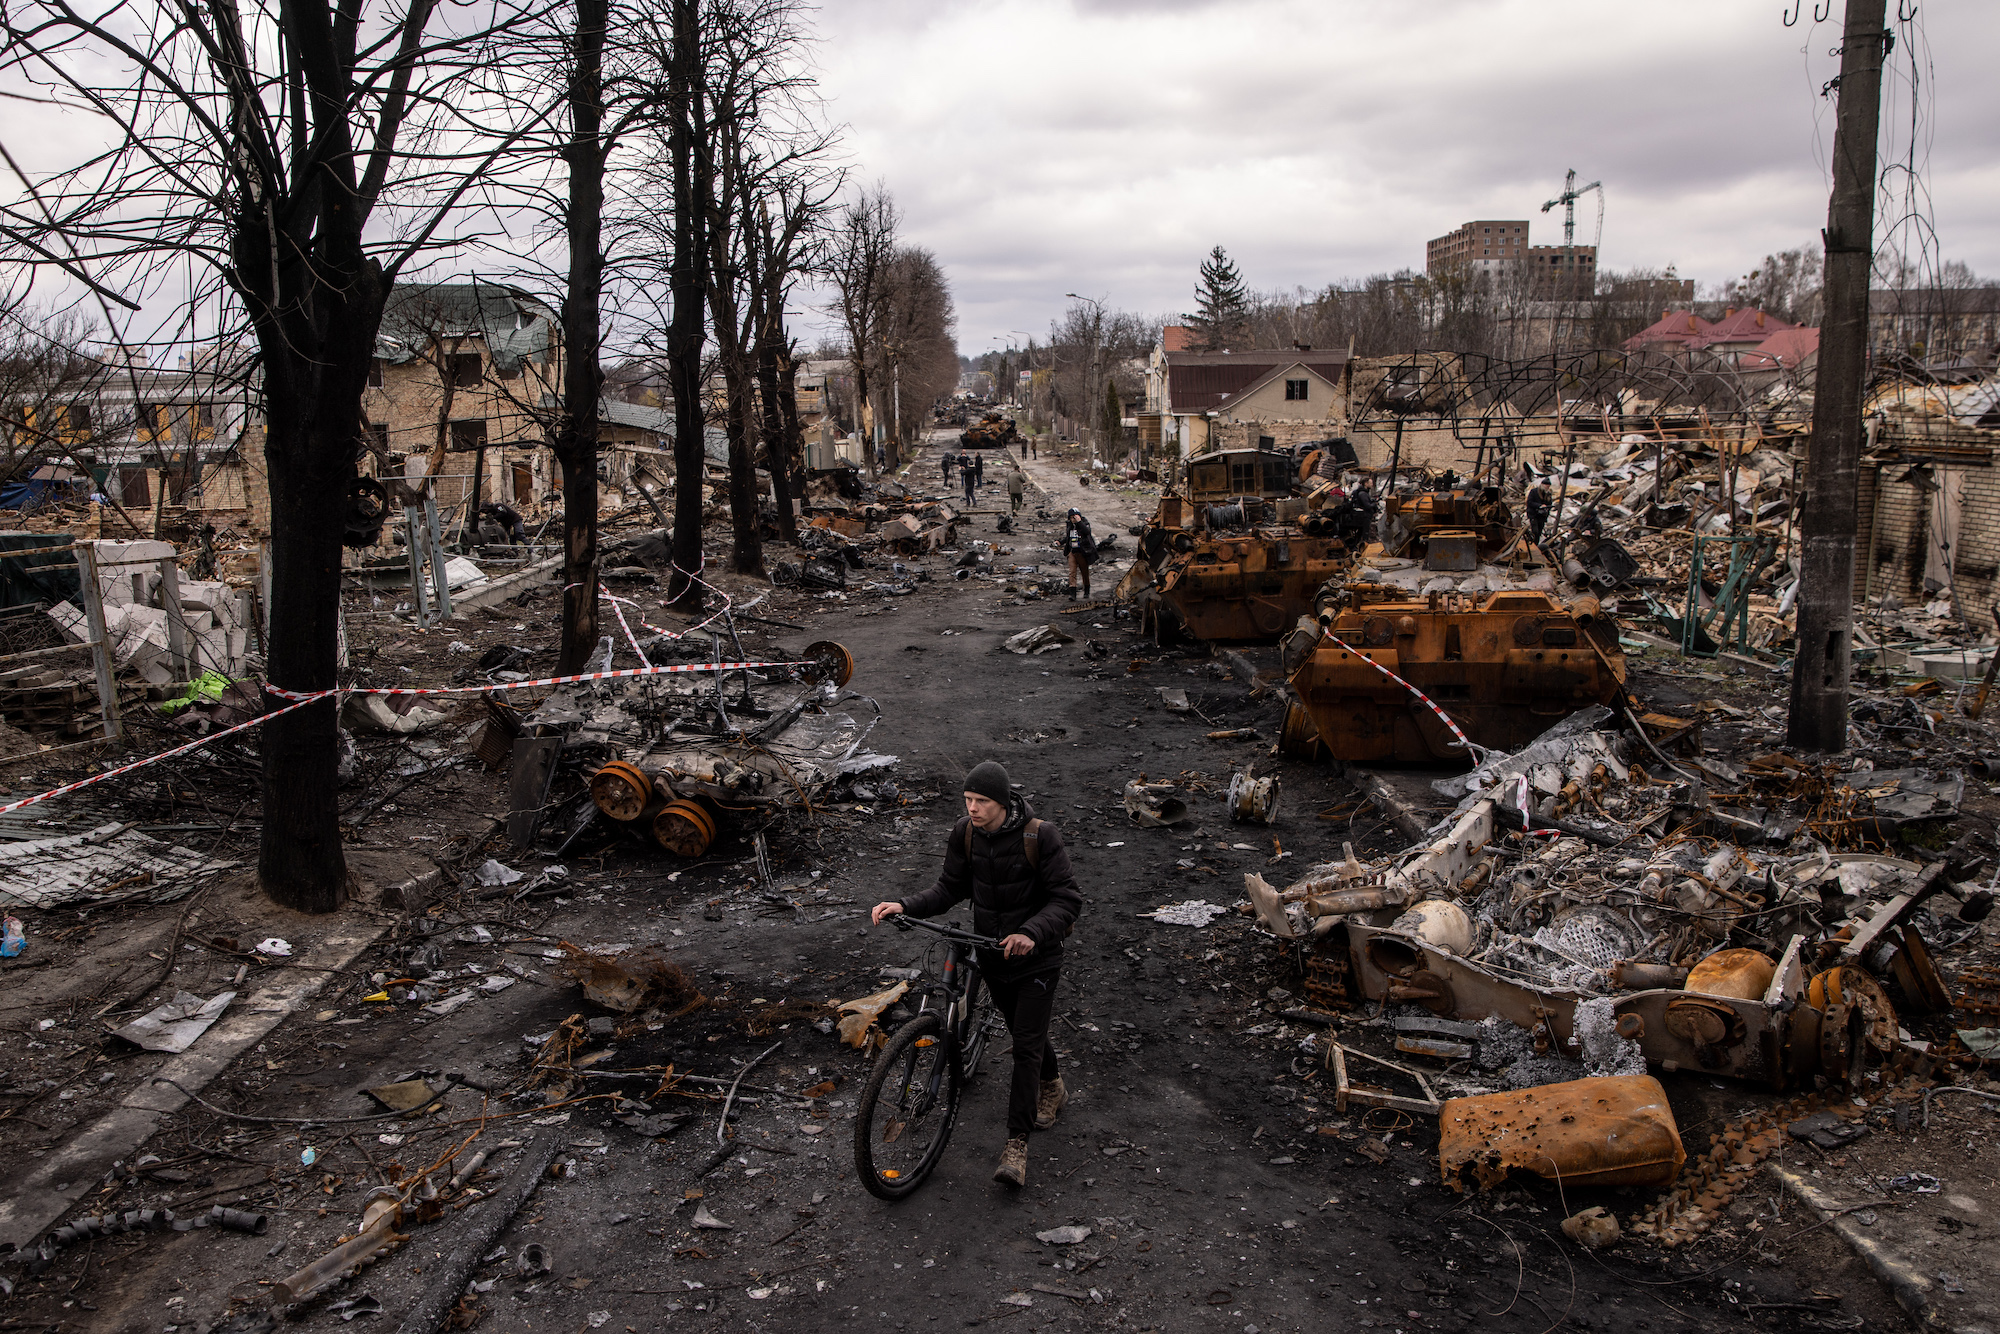 A man pushes a bike through debris and destroyed Russian military vehicles in Bucha in April 2022.